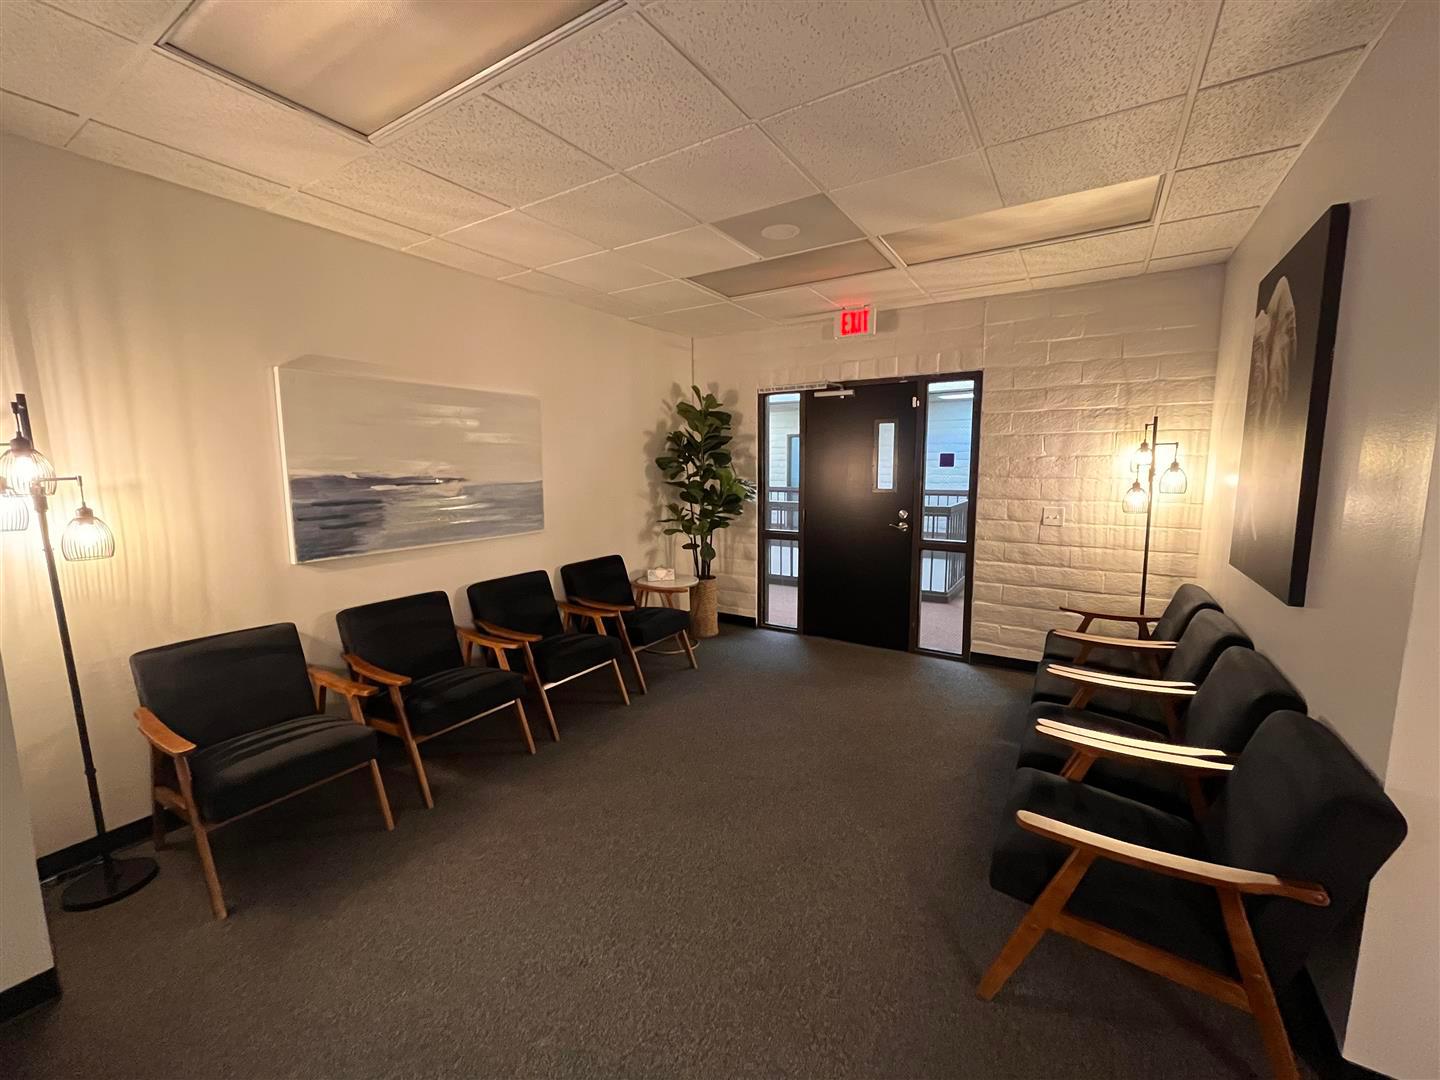 When you're searching for therapy near you, Hope & Healing Counseling Services is here to provide accessible and professional counseling services. With conveniently located offices, we offer therapy services that are easily accessible, ensuring that you can receive the support and care you need close to home.